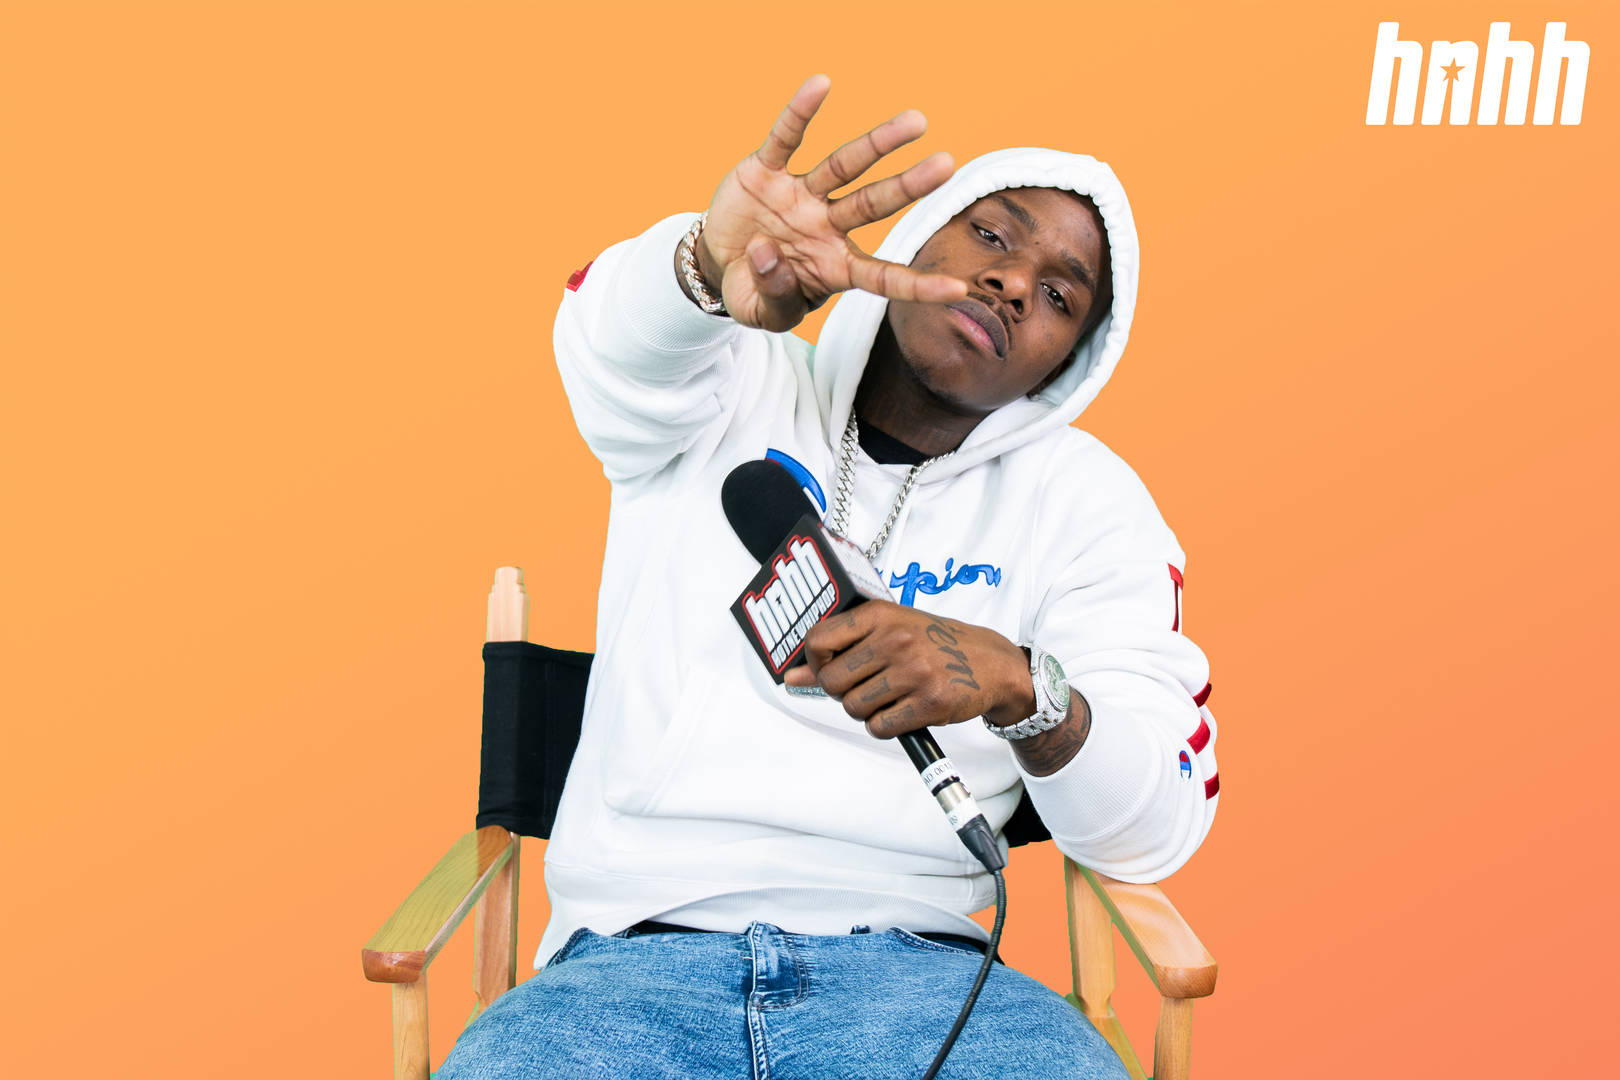 DaBaby Appears To Spit At Crowd After Fan Allegedly Throws Singles At Him 16